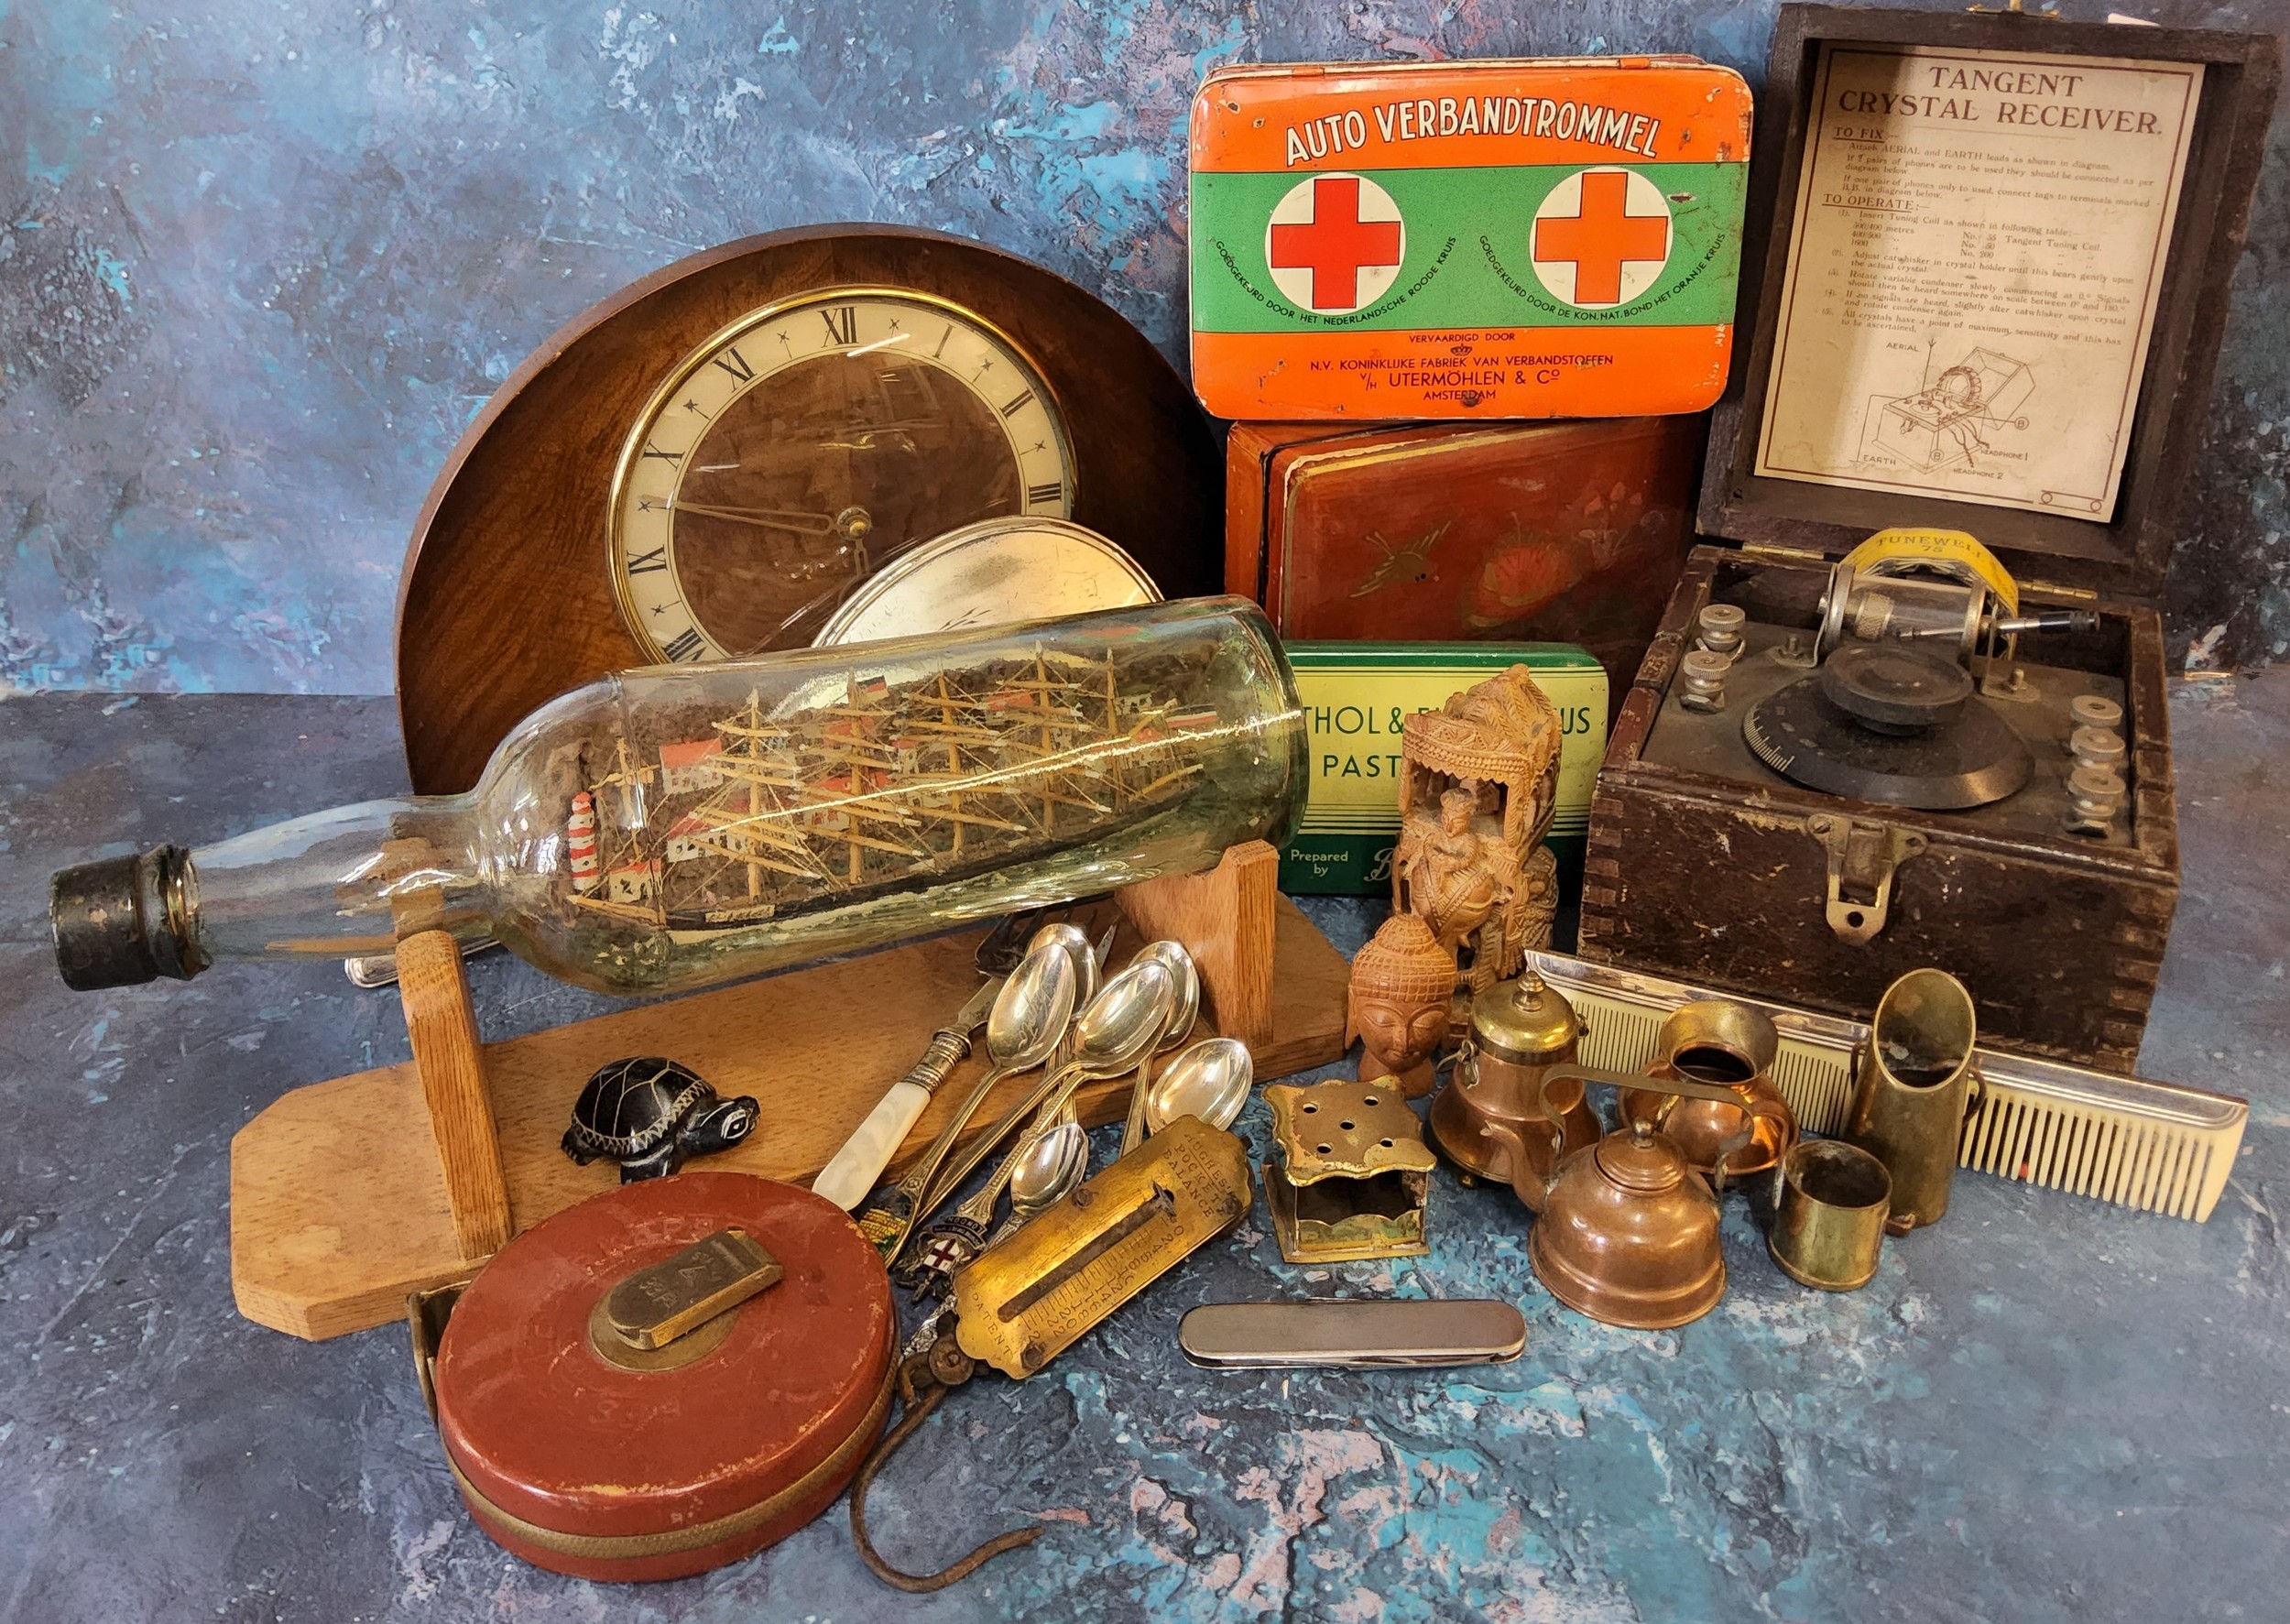 A Tangent Crystal Receiver, boxed;  a walnut mantel clock, c.1950;  ship in a bottle;  mid 20th